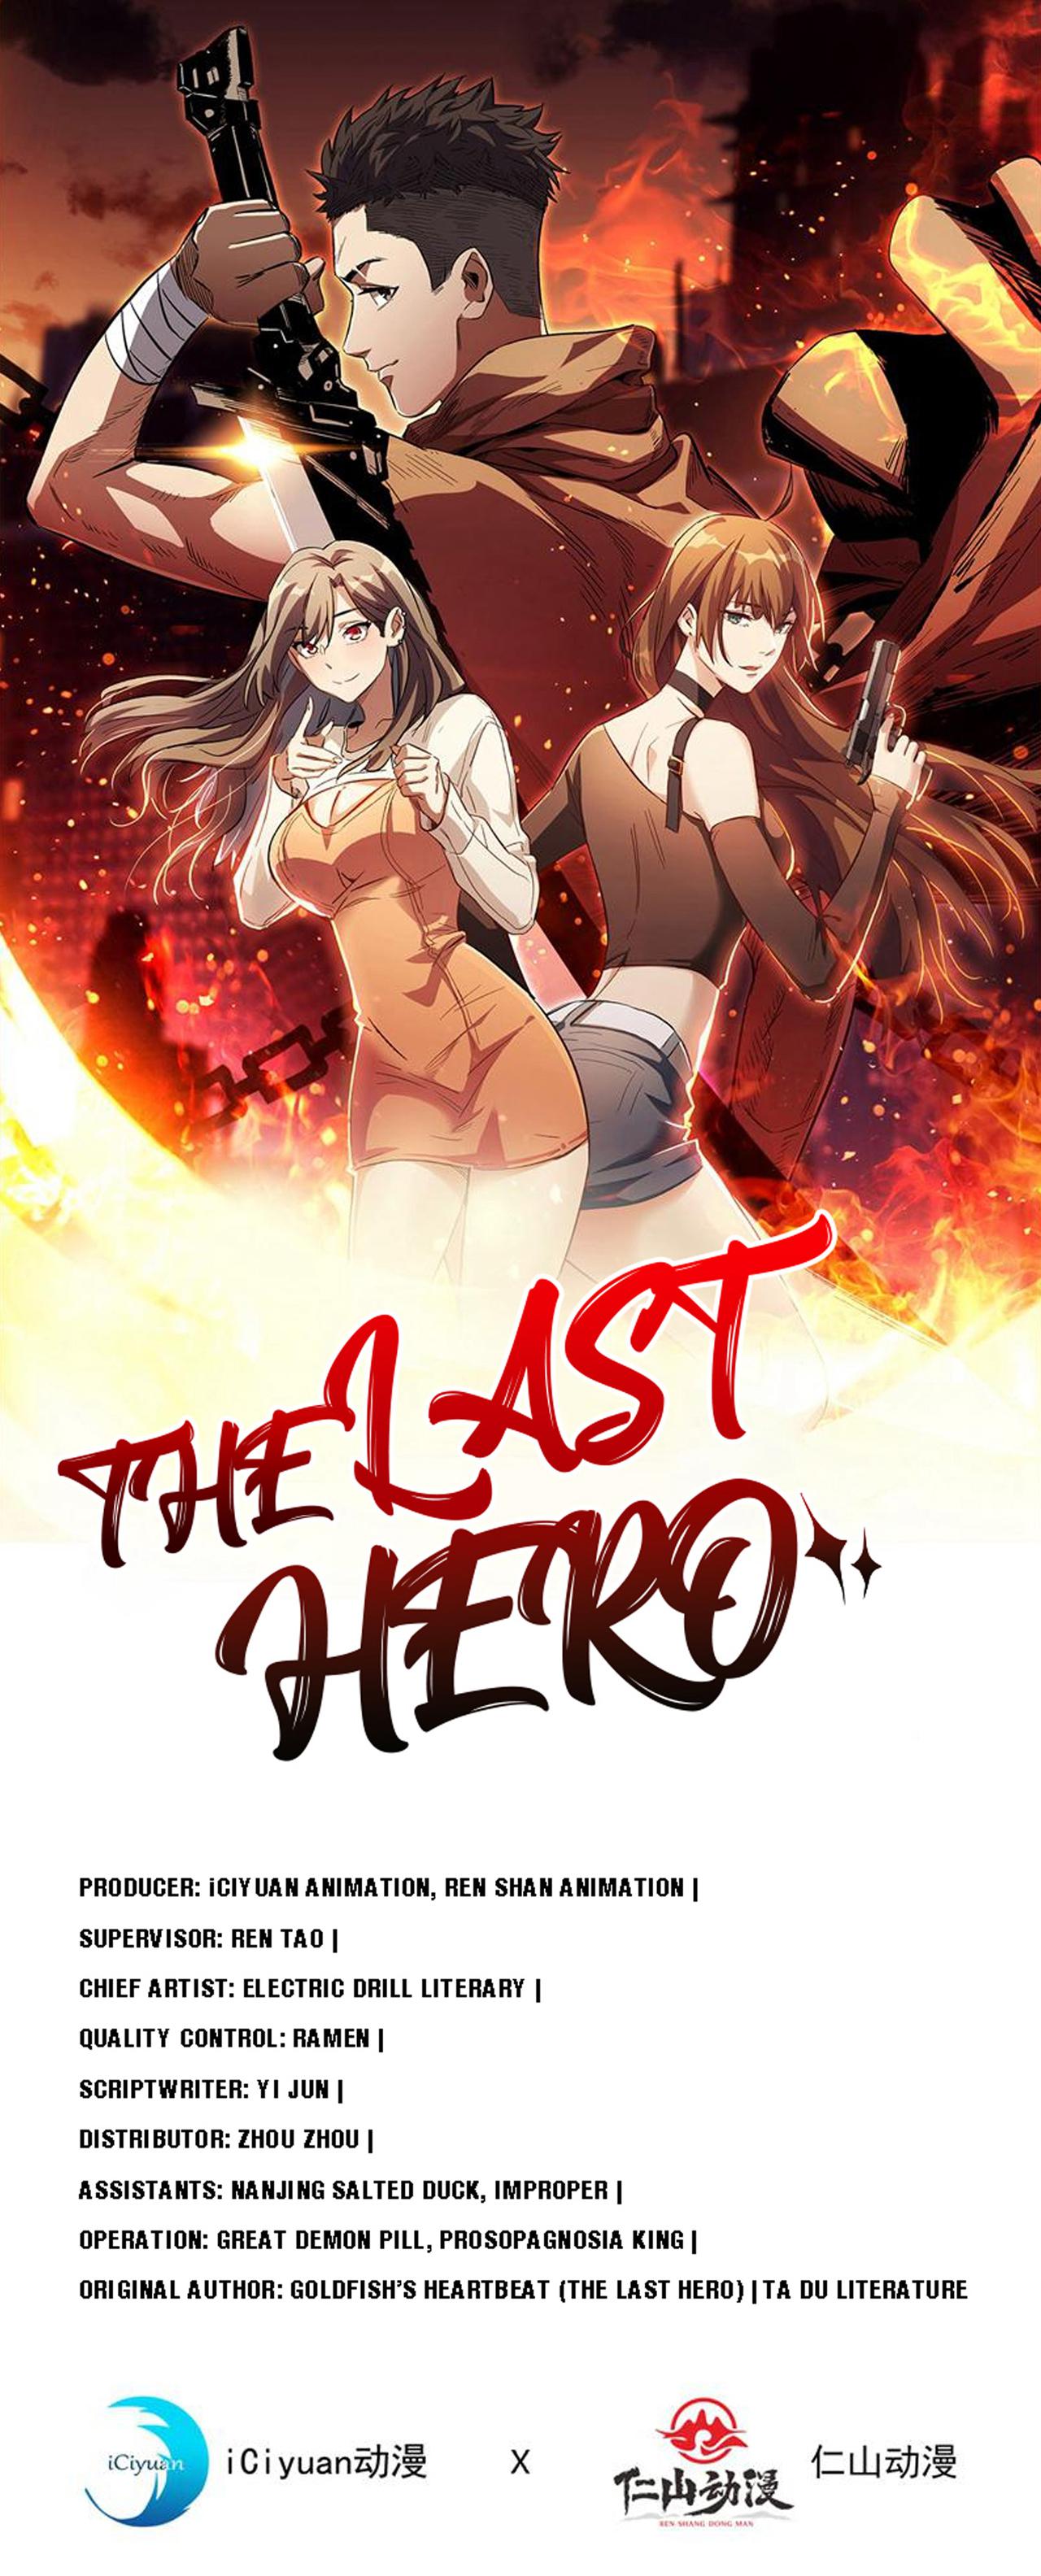 The Last Hero, I Am Picking up Attributes and Items in Last Days 128